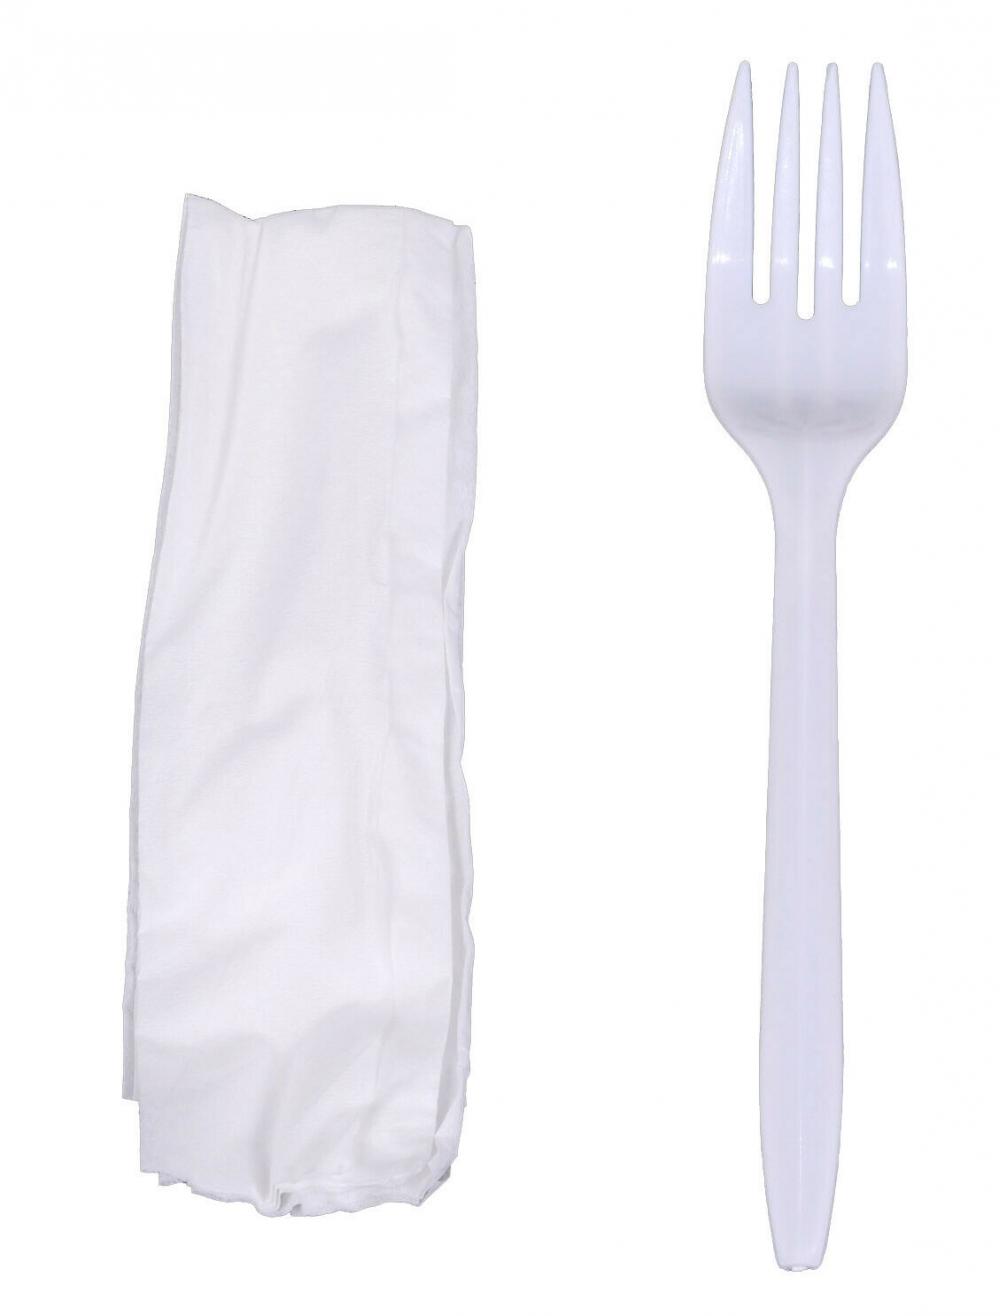 Napkins with Silver Plastic Cutlery Set